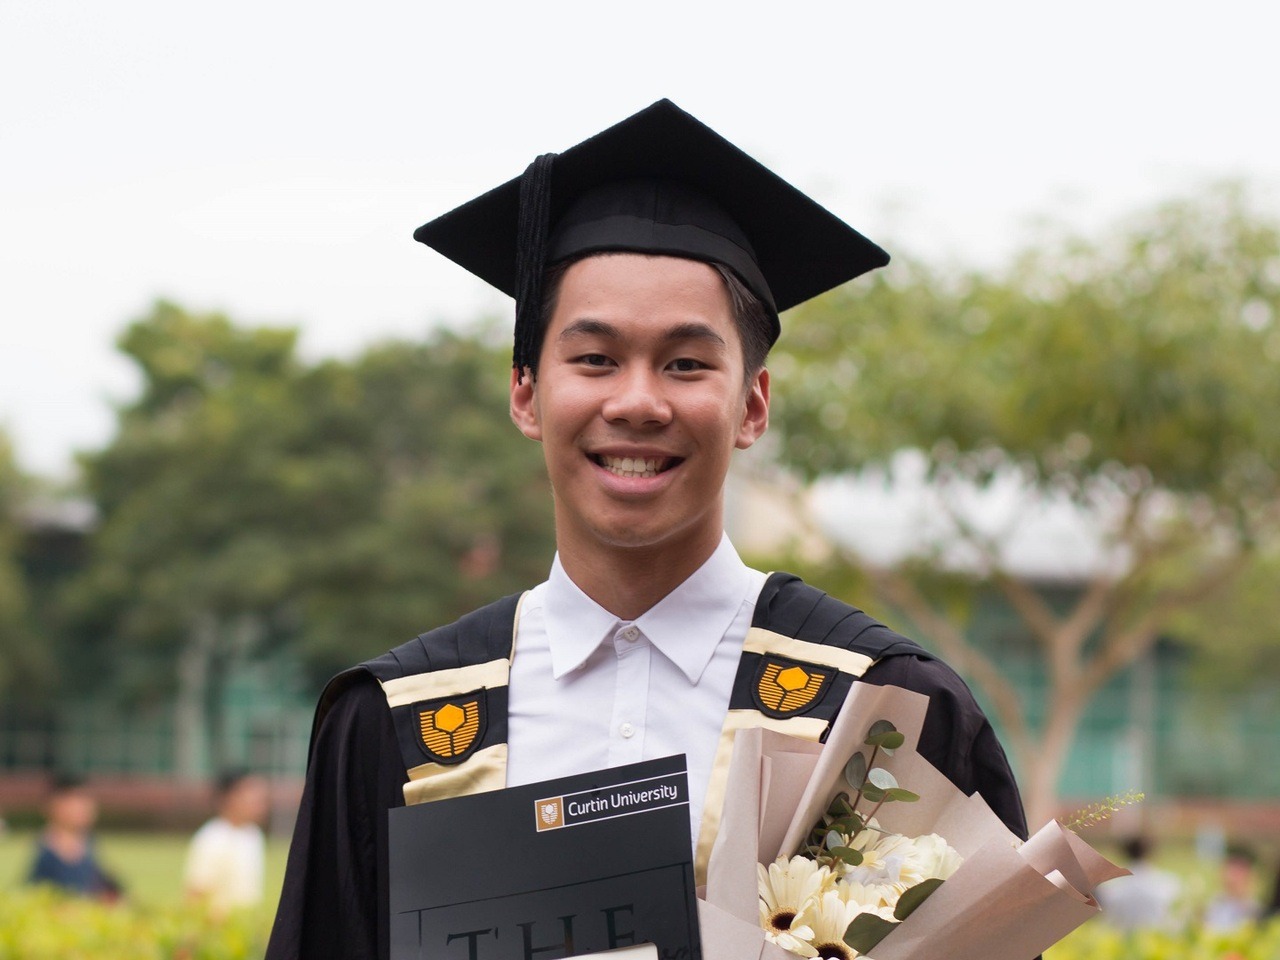 “Not only does Curtin Malaysia have exceptional courses and lecturers, it also boasts a diversity of students from different countries. I have had opportunities to work with people from around the world which has helped me adopt new perspectives...